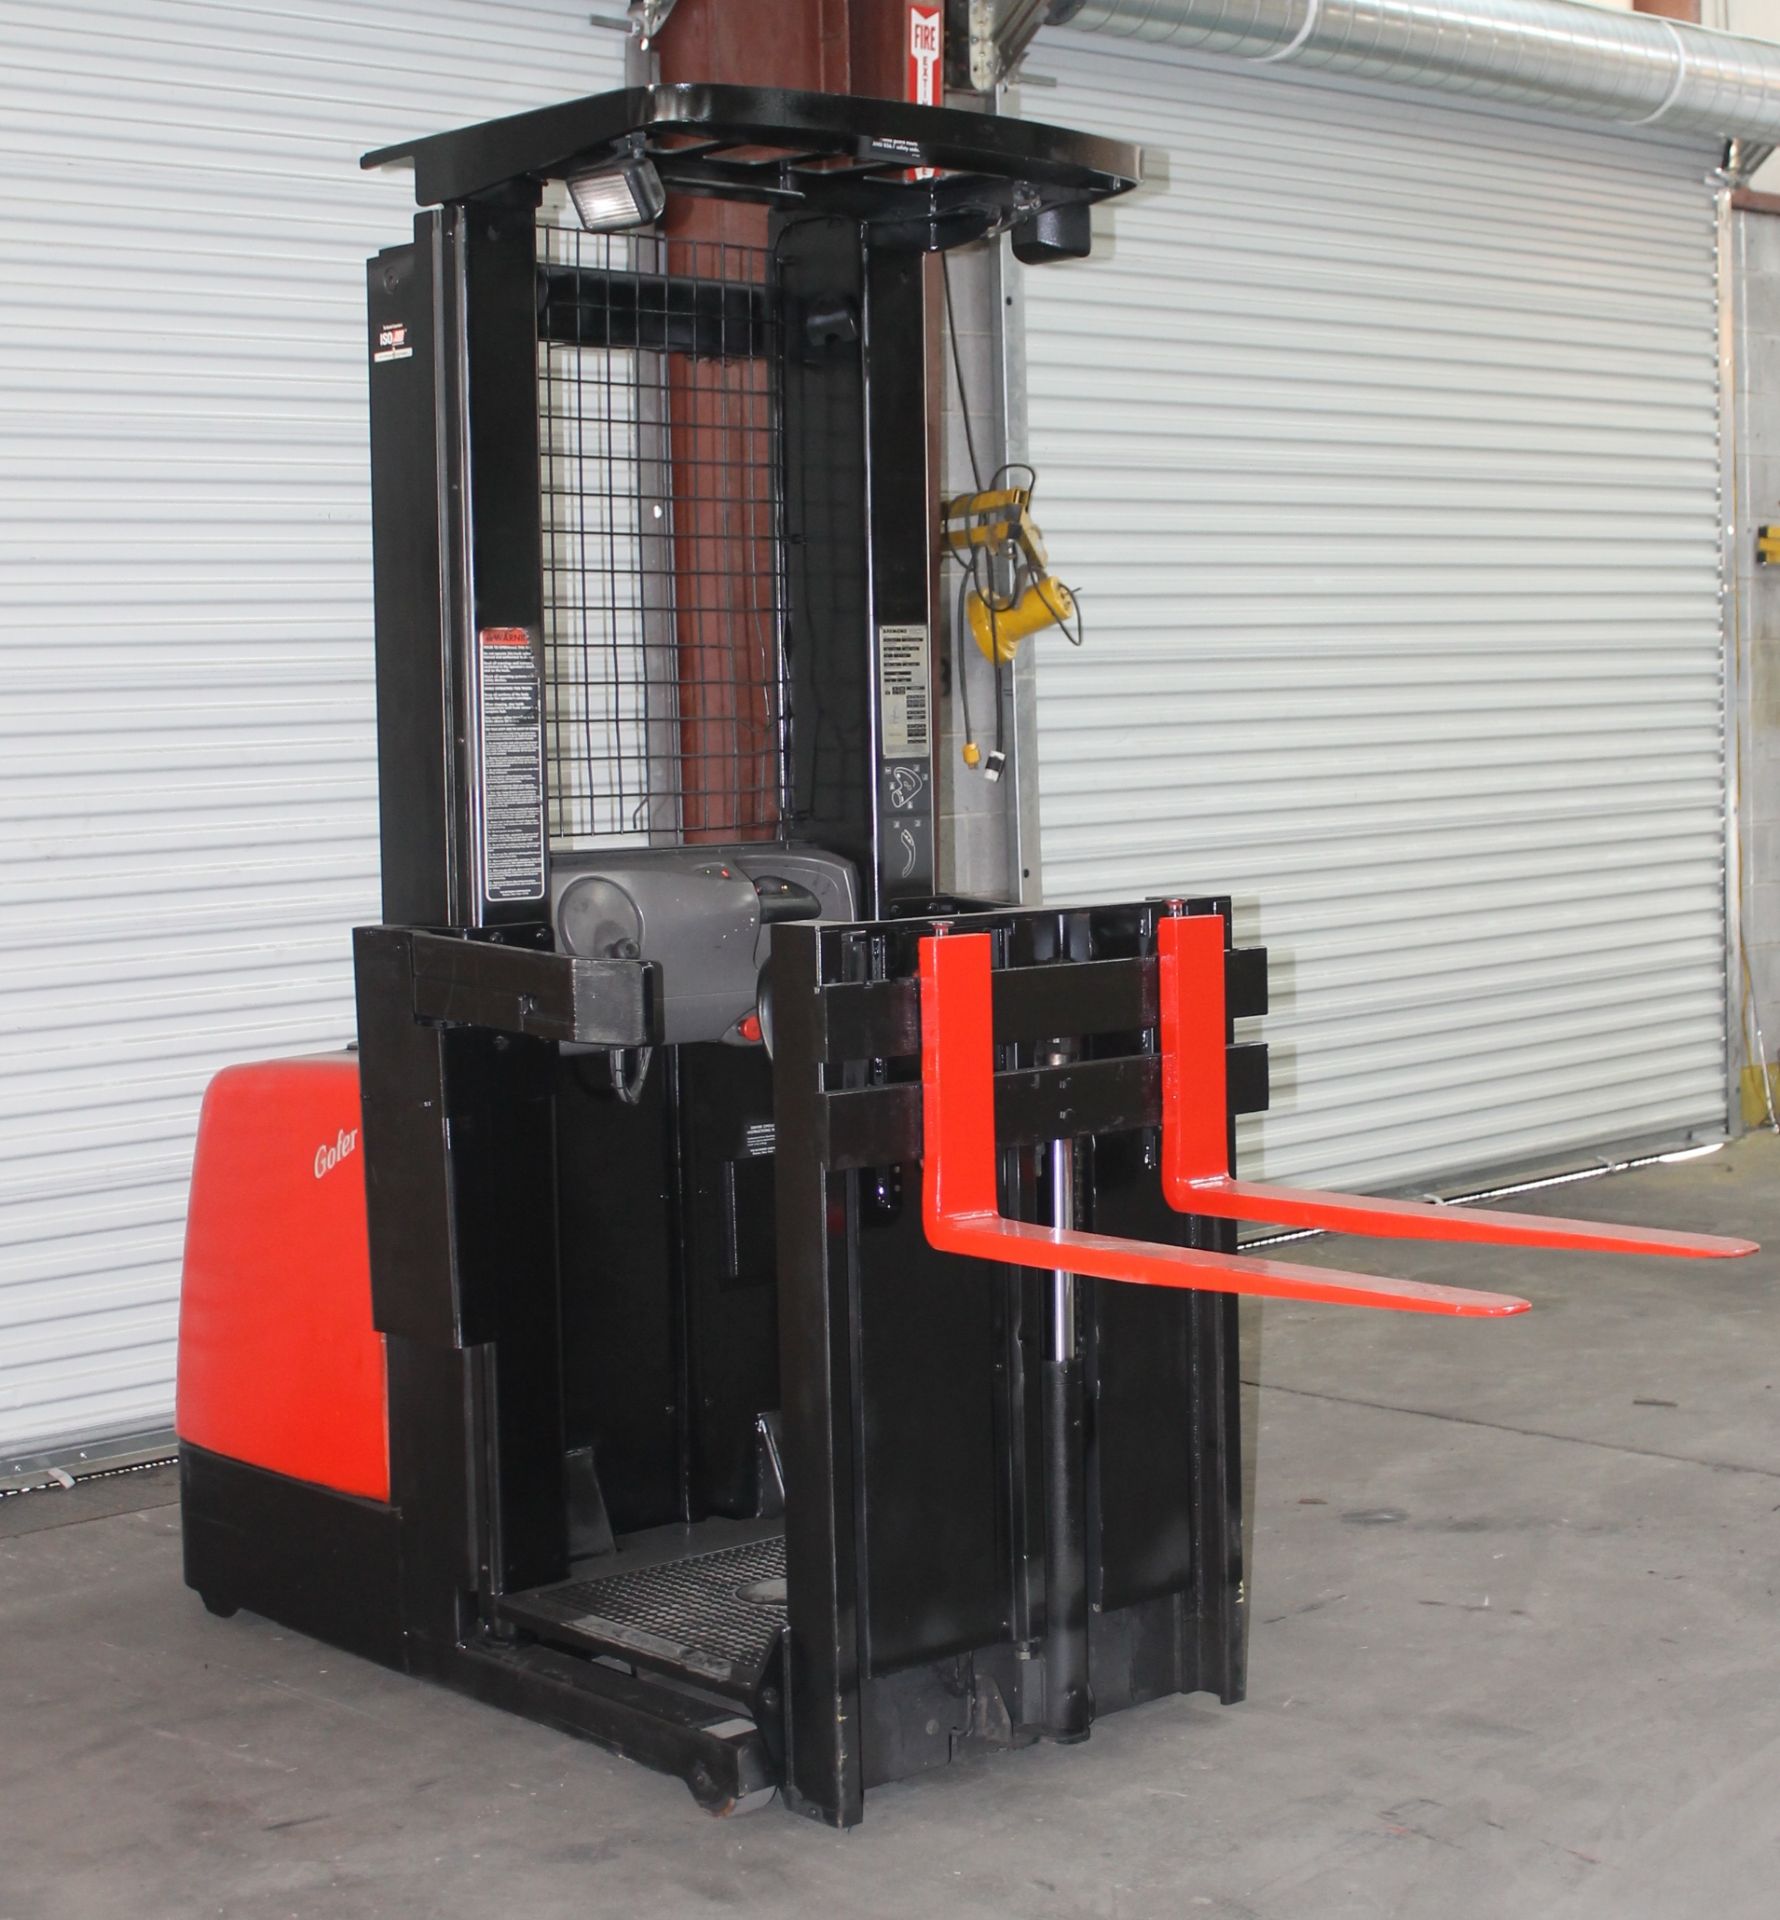 2003 RAYMOND ORDER PICKER WITH ERGO LIFT / MINI MAST FEATURE, CLICK HERE TO WATCH VIDEO - Image 2 of 8